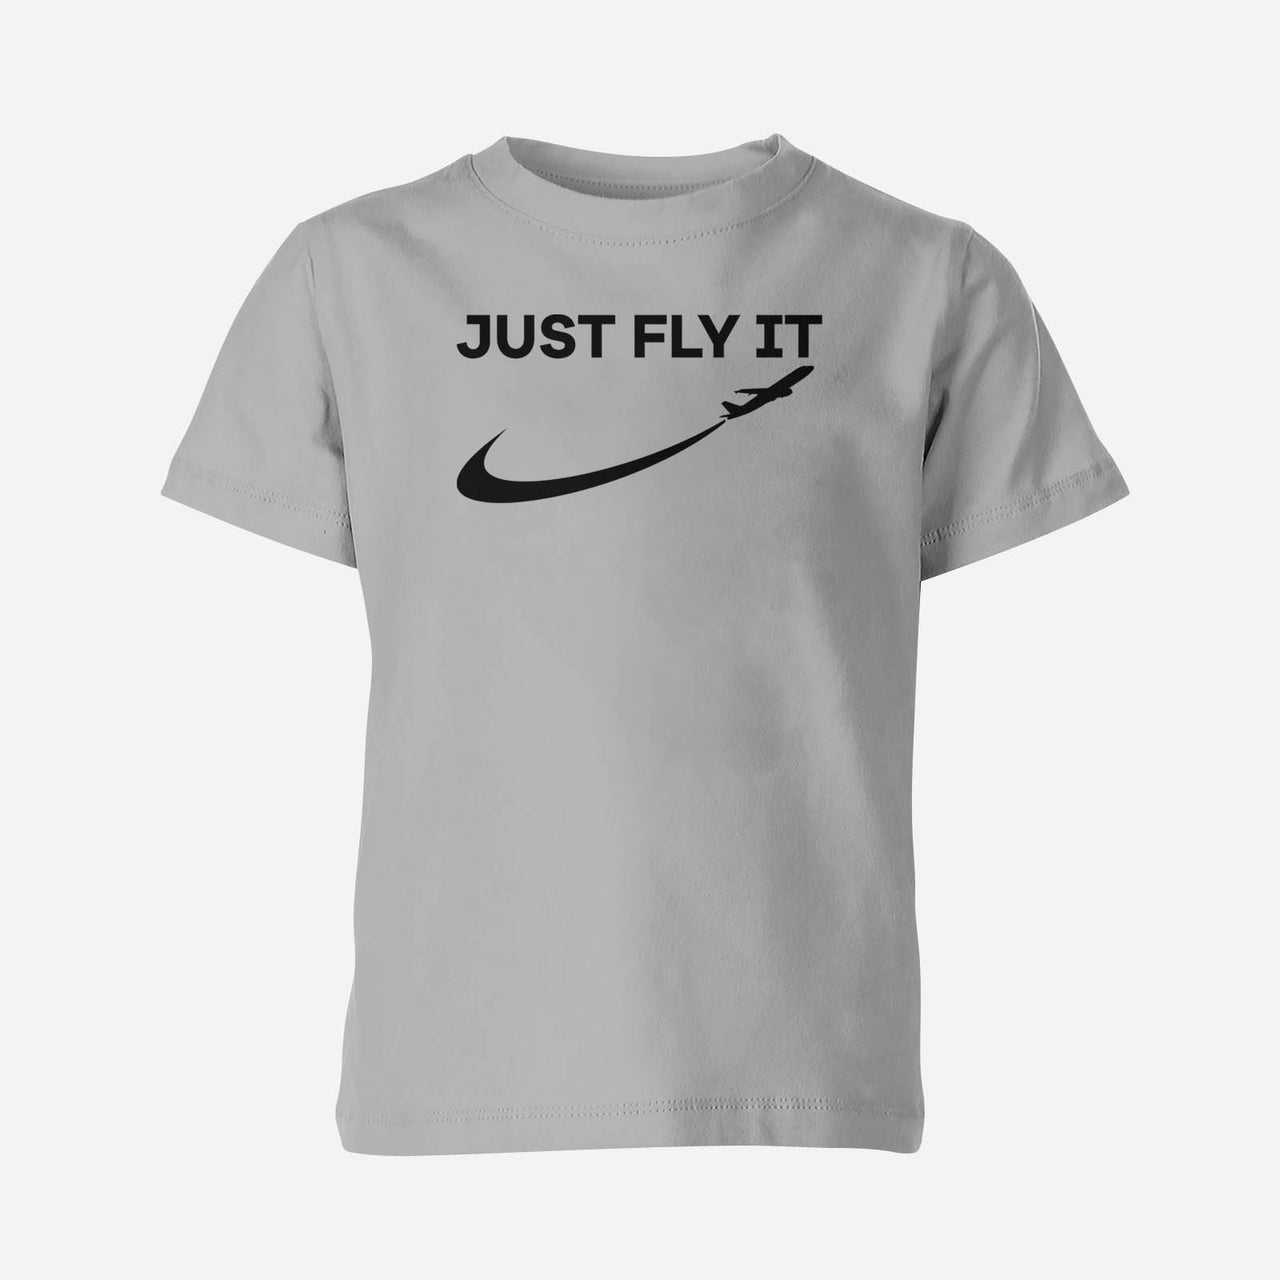 Just Fly It 2 Designed Children T-Shirts